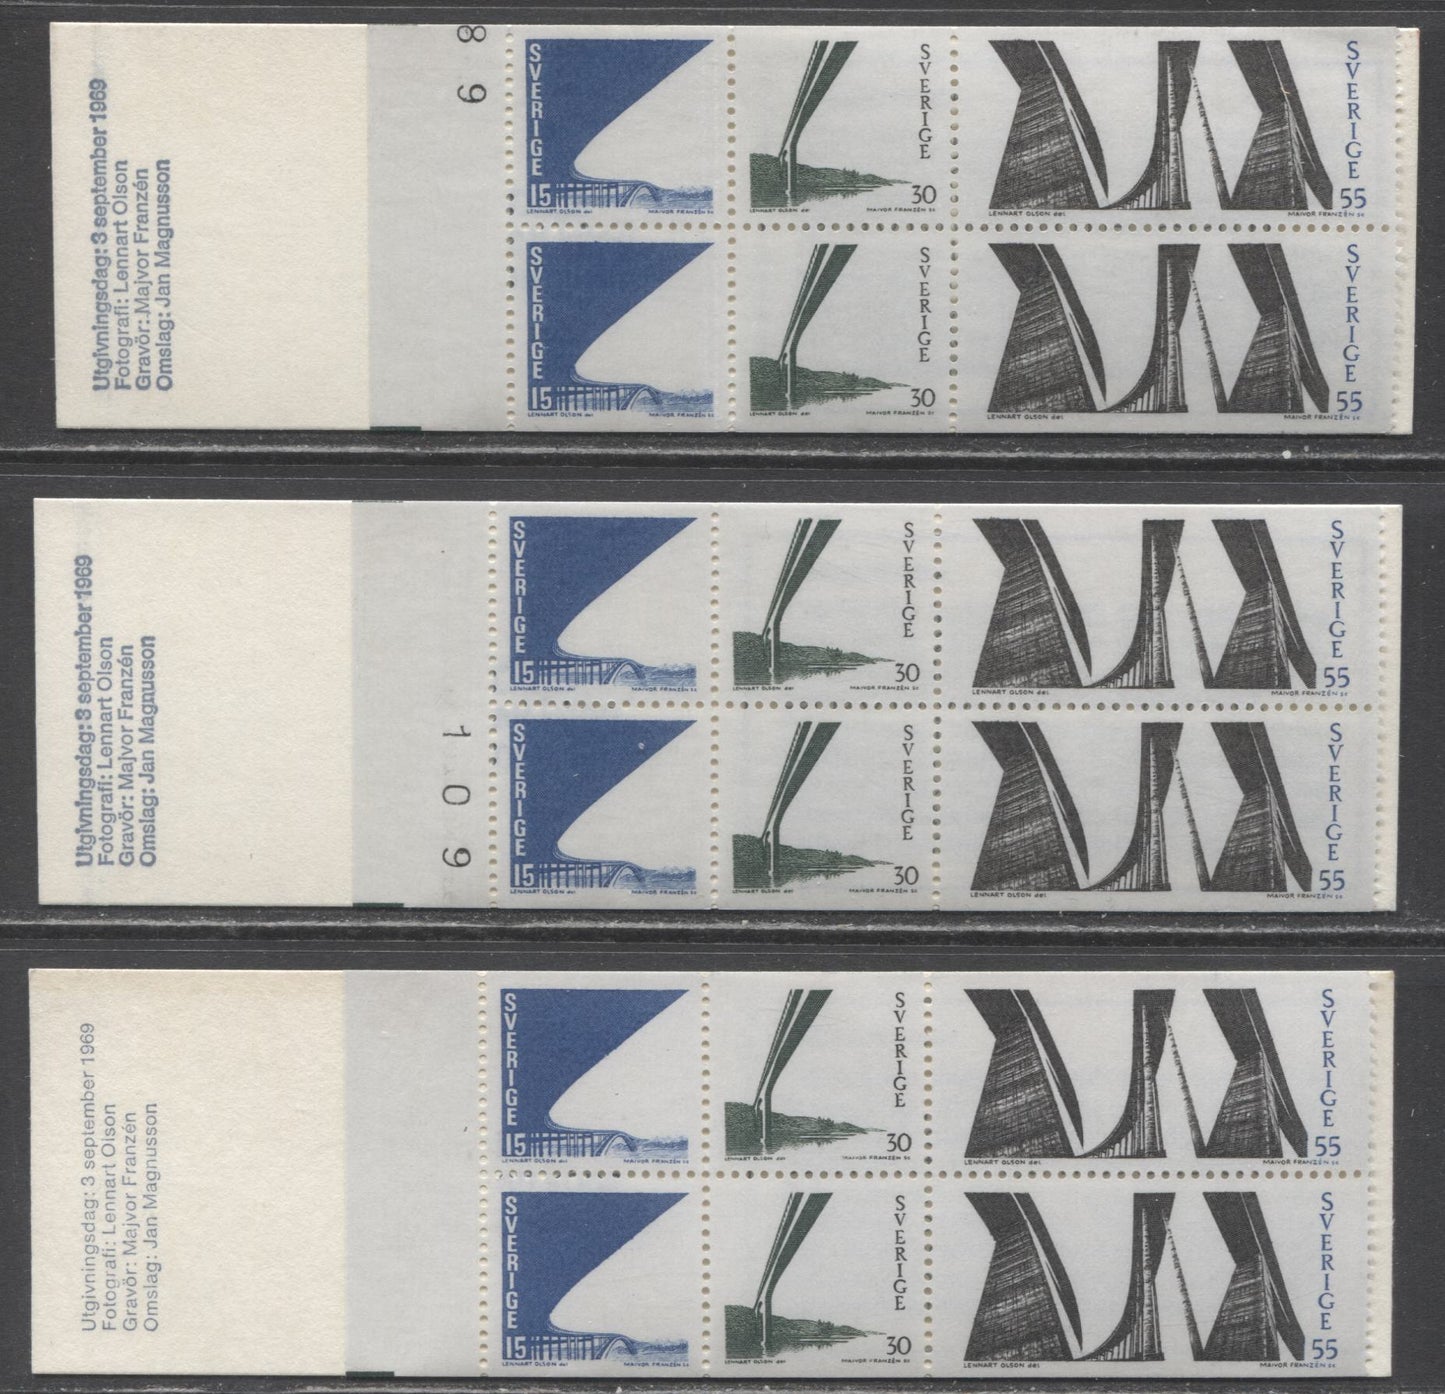 Lot 272 Sweden SC#824a (Facit #HA18B) 15 Ore, 30 Ore & 55 Ore Various Colours 1969 Tjorn Bridges Issue, Perforated Cover Spine, NF-fl & NF Covers, 3 and 2 Digits of Control Number Visible, 3 VFNH Booklets Of 6 (2x3), Estimated Value $39